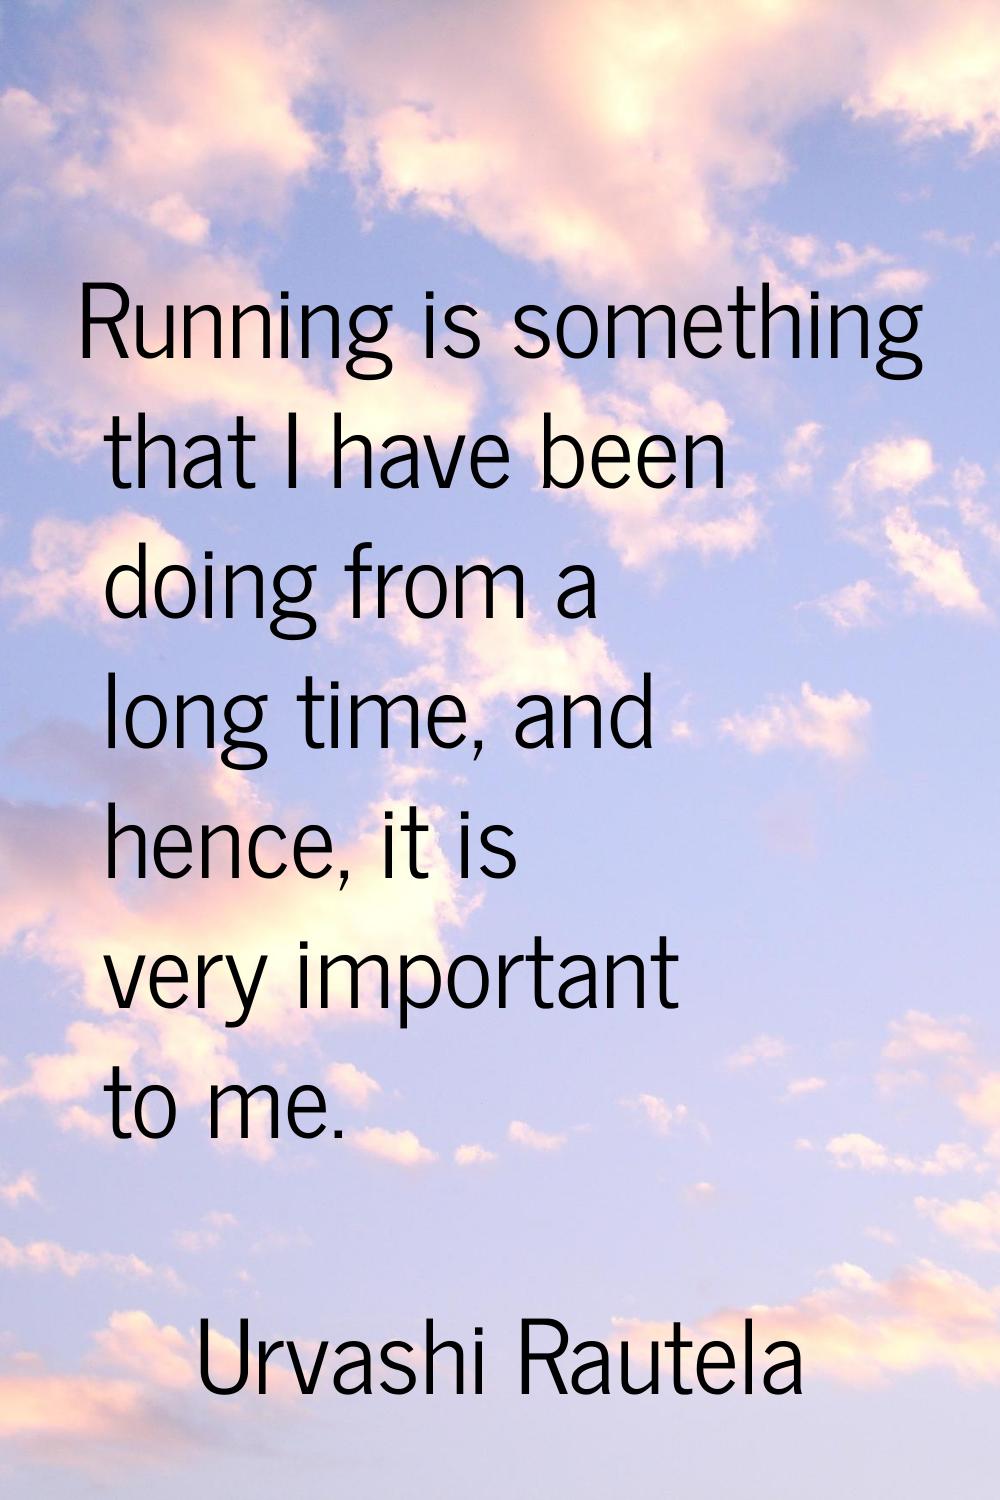 Running is something that I have been doing from a long time, and hence, it is very important to me